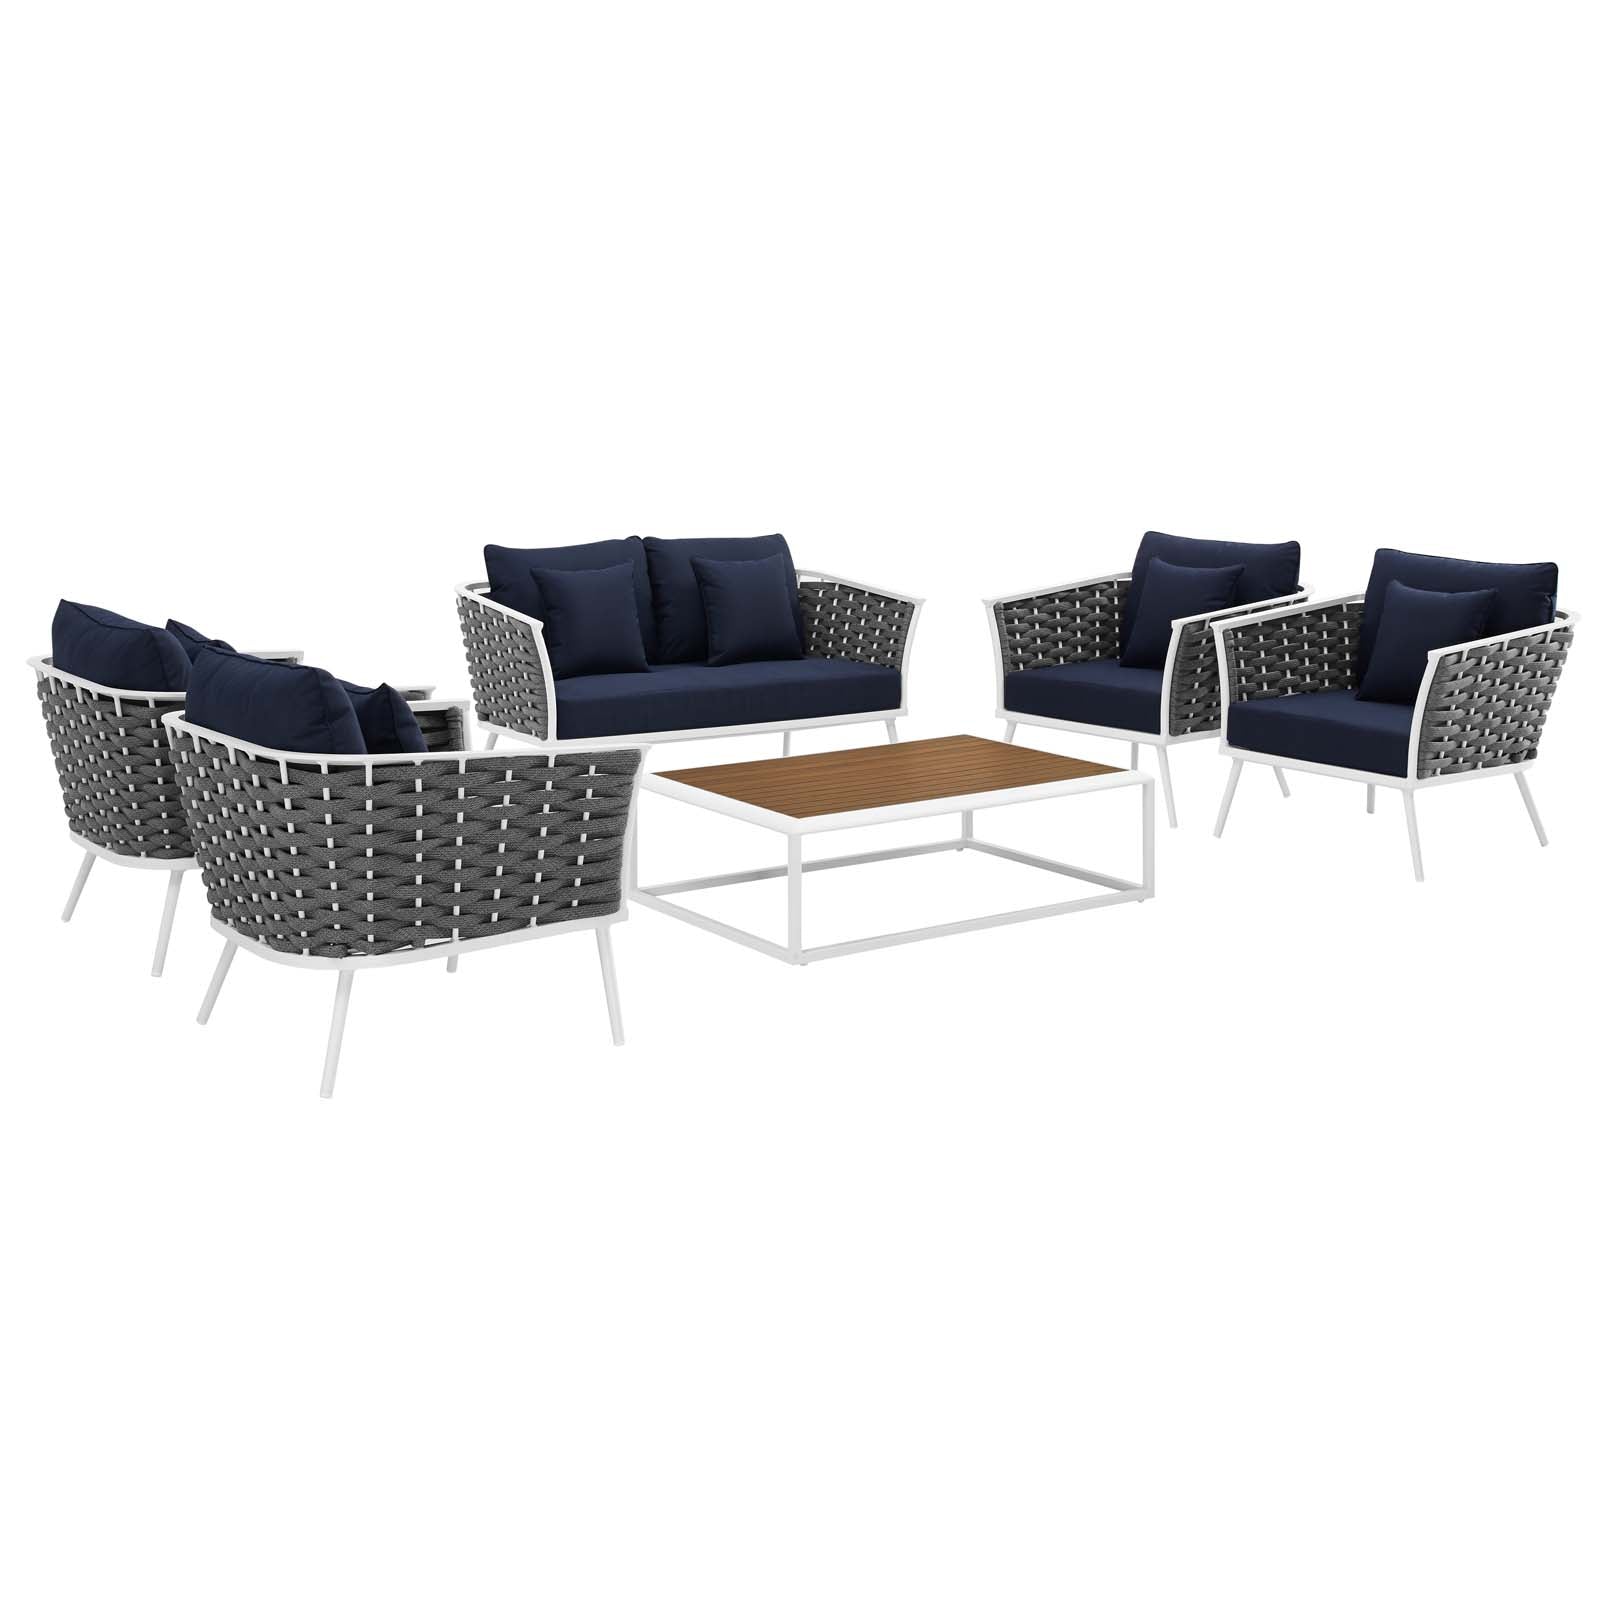 Stance 6 Piece Outdoor Patio Aluminum Sectional Sofa Set - East Shore Modern Home Furnishings